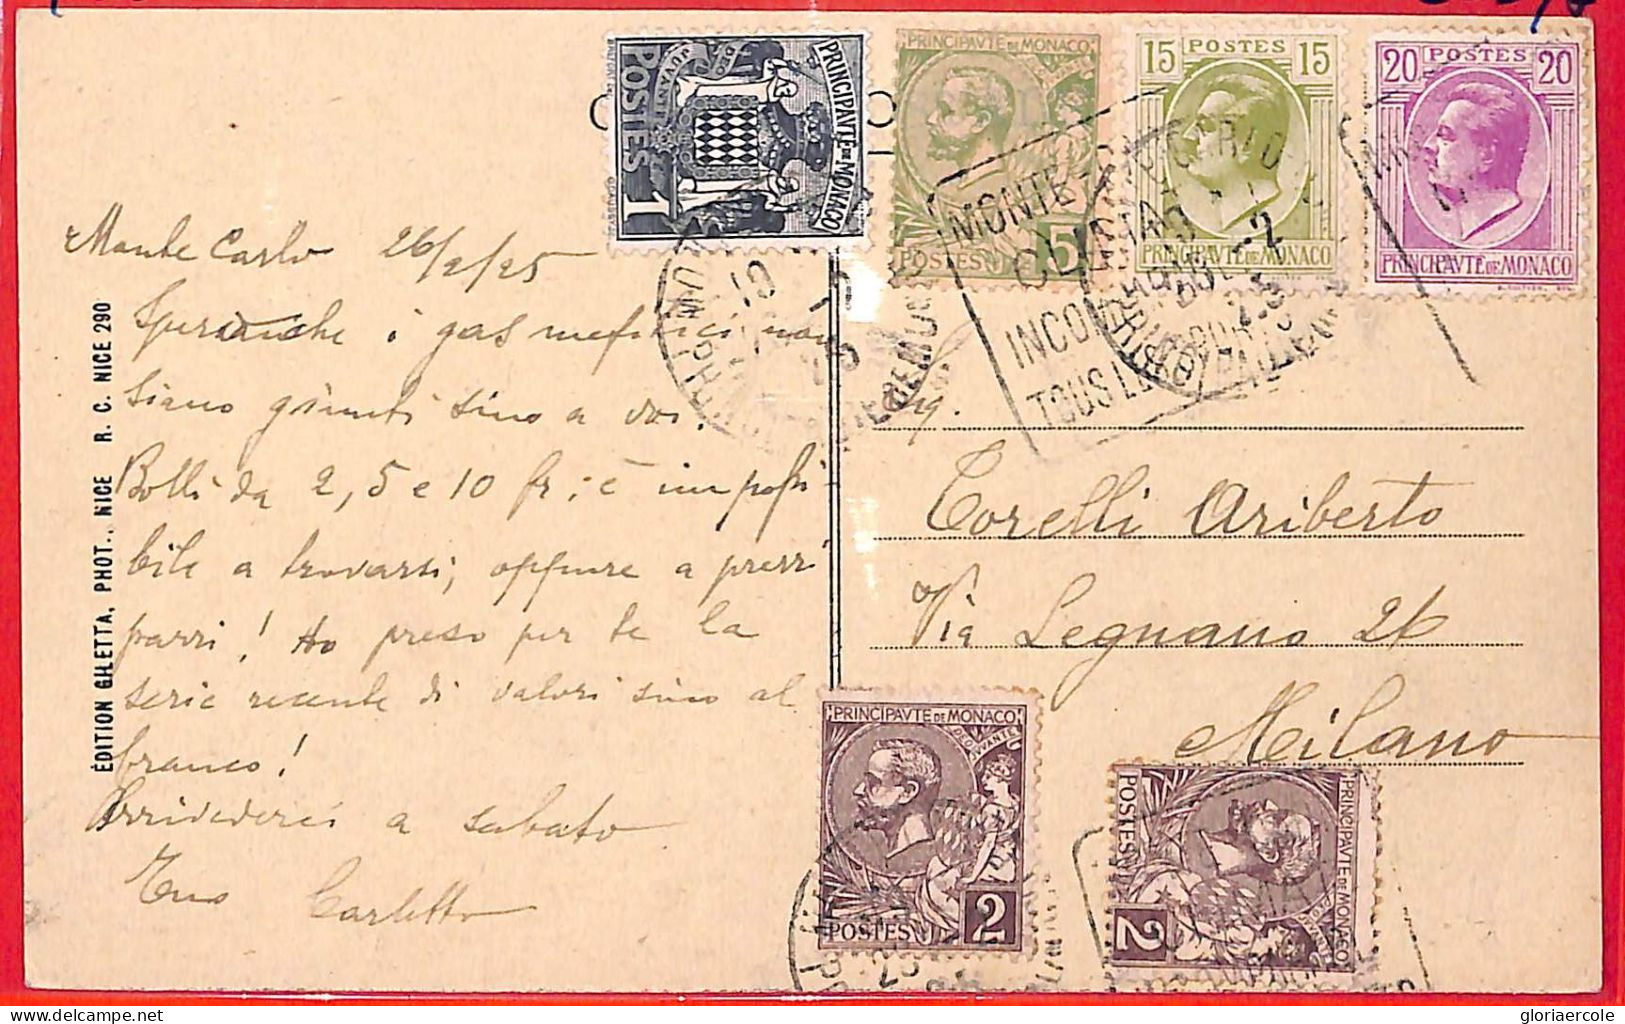 Aa1014 - MONACO - Postal History -  Nice Franking On POSTCARD  To ITALY 1925 - Covers & Documents